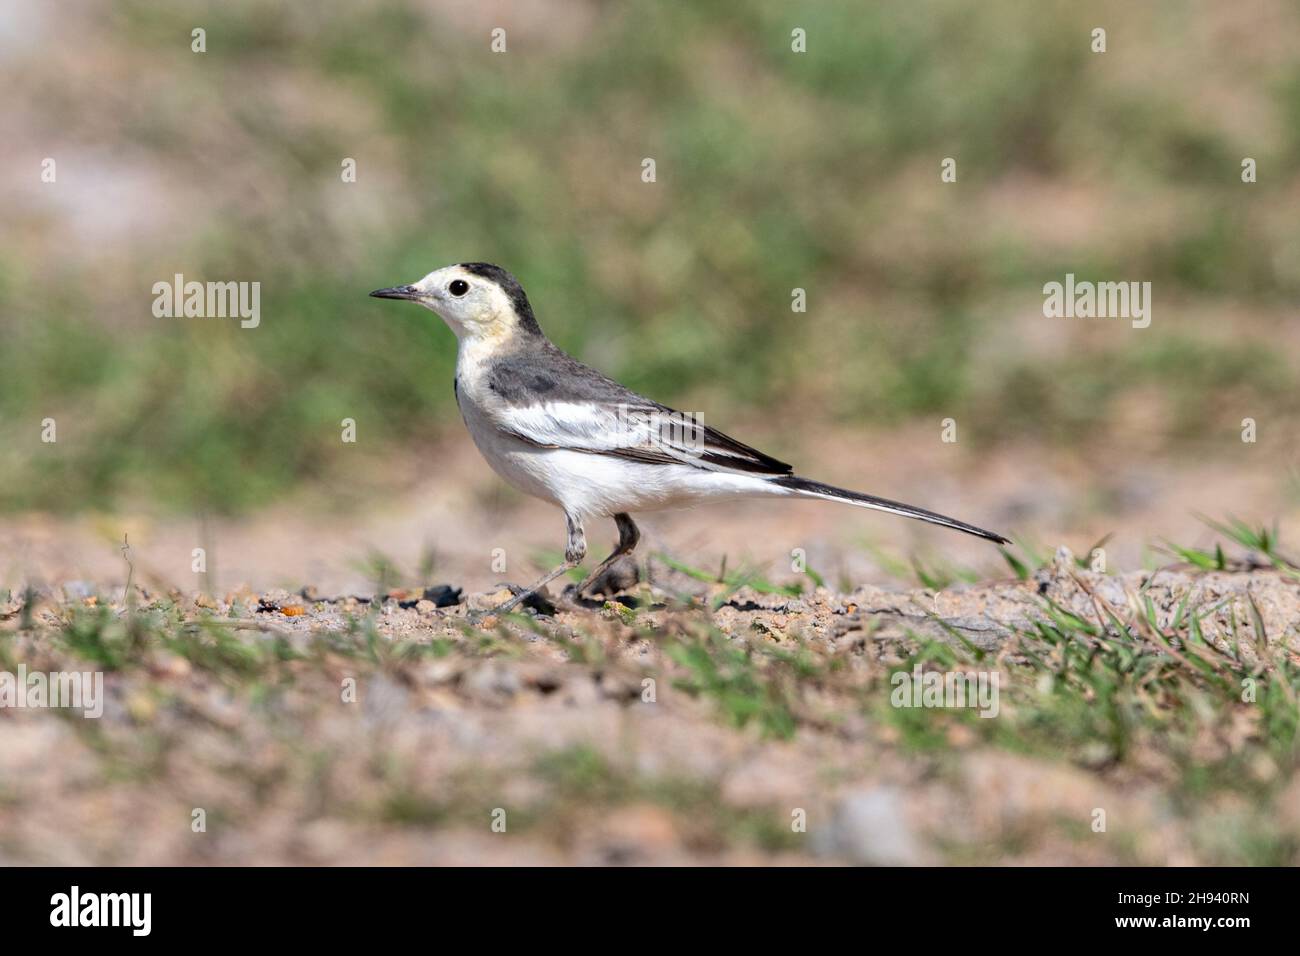 The white wagtail is an insectivorous bird of open country, often near habitation and water. It prefers bare areas for feeding, where it can see and p Stock Photo